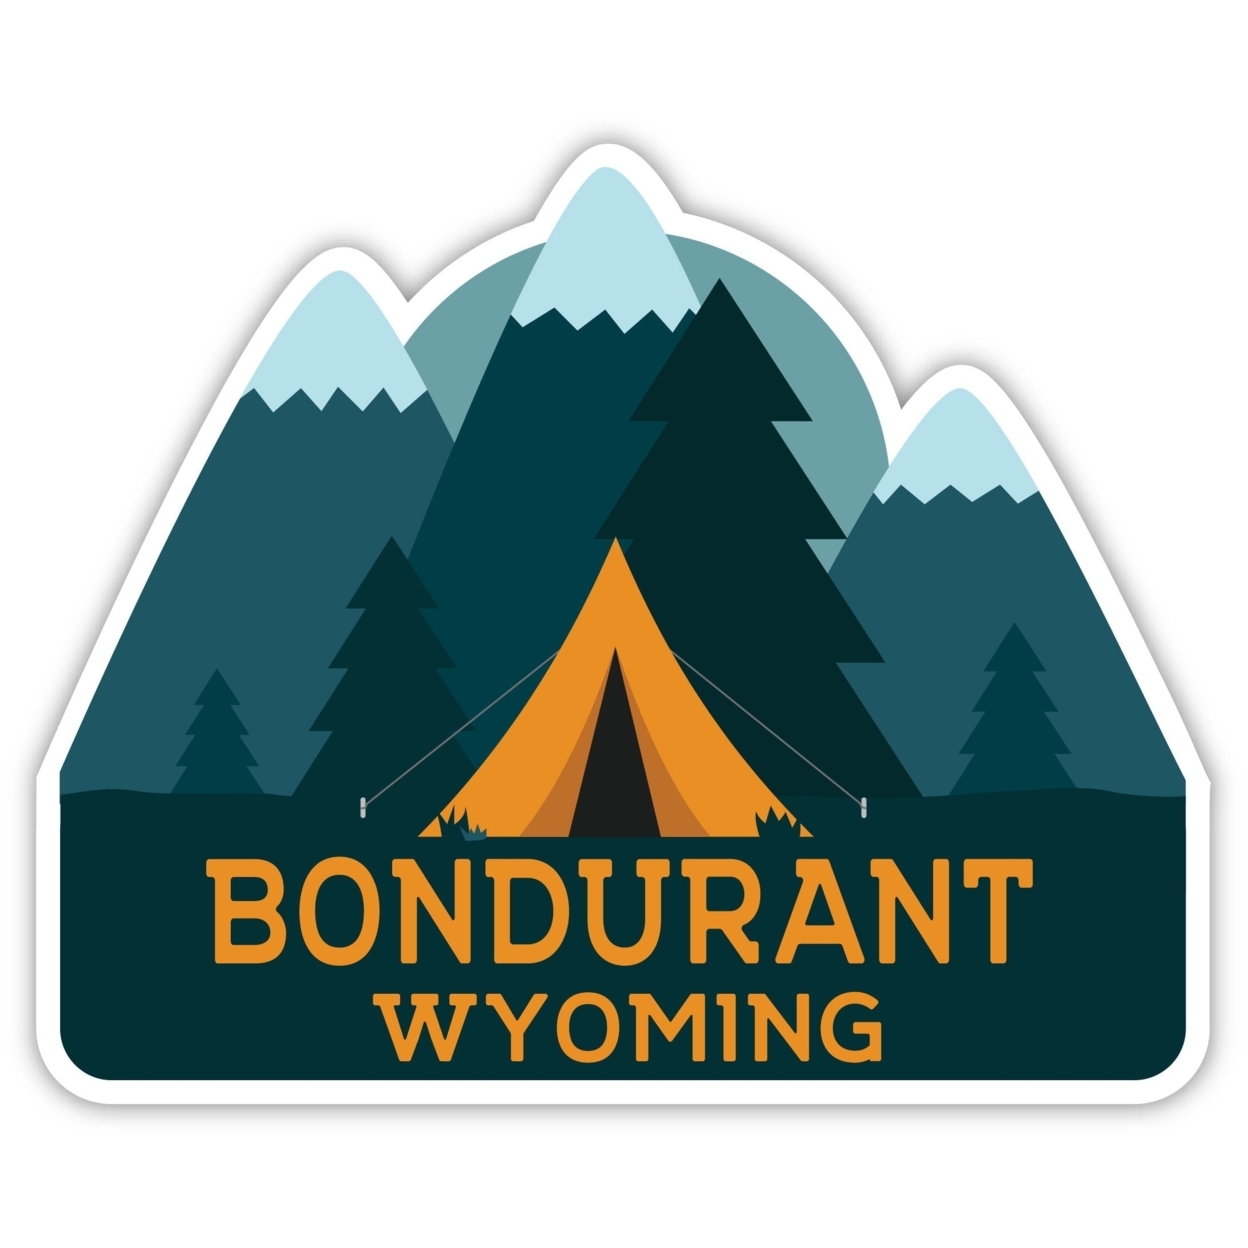 Bondurant Wyoming Souvenir Decorative Stickers (Choose Theme And Size) - 4-Pack, 8-Inch, Tent